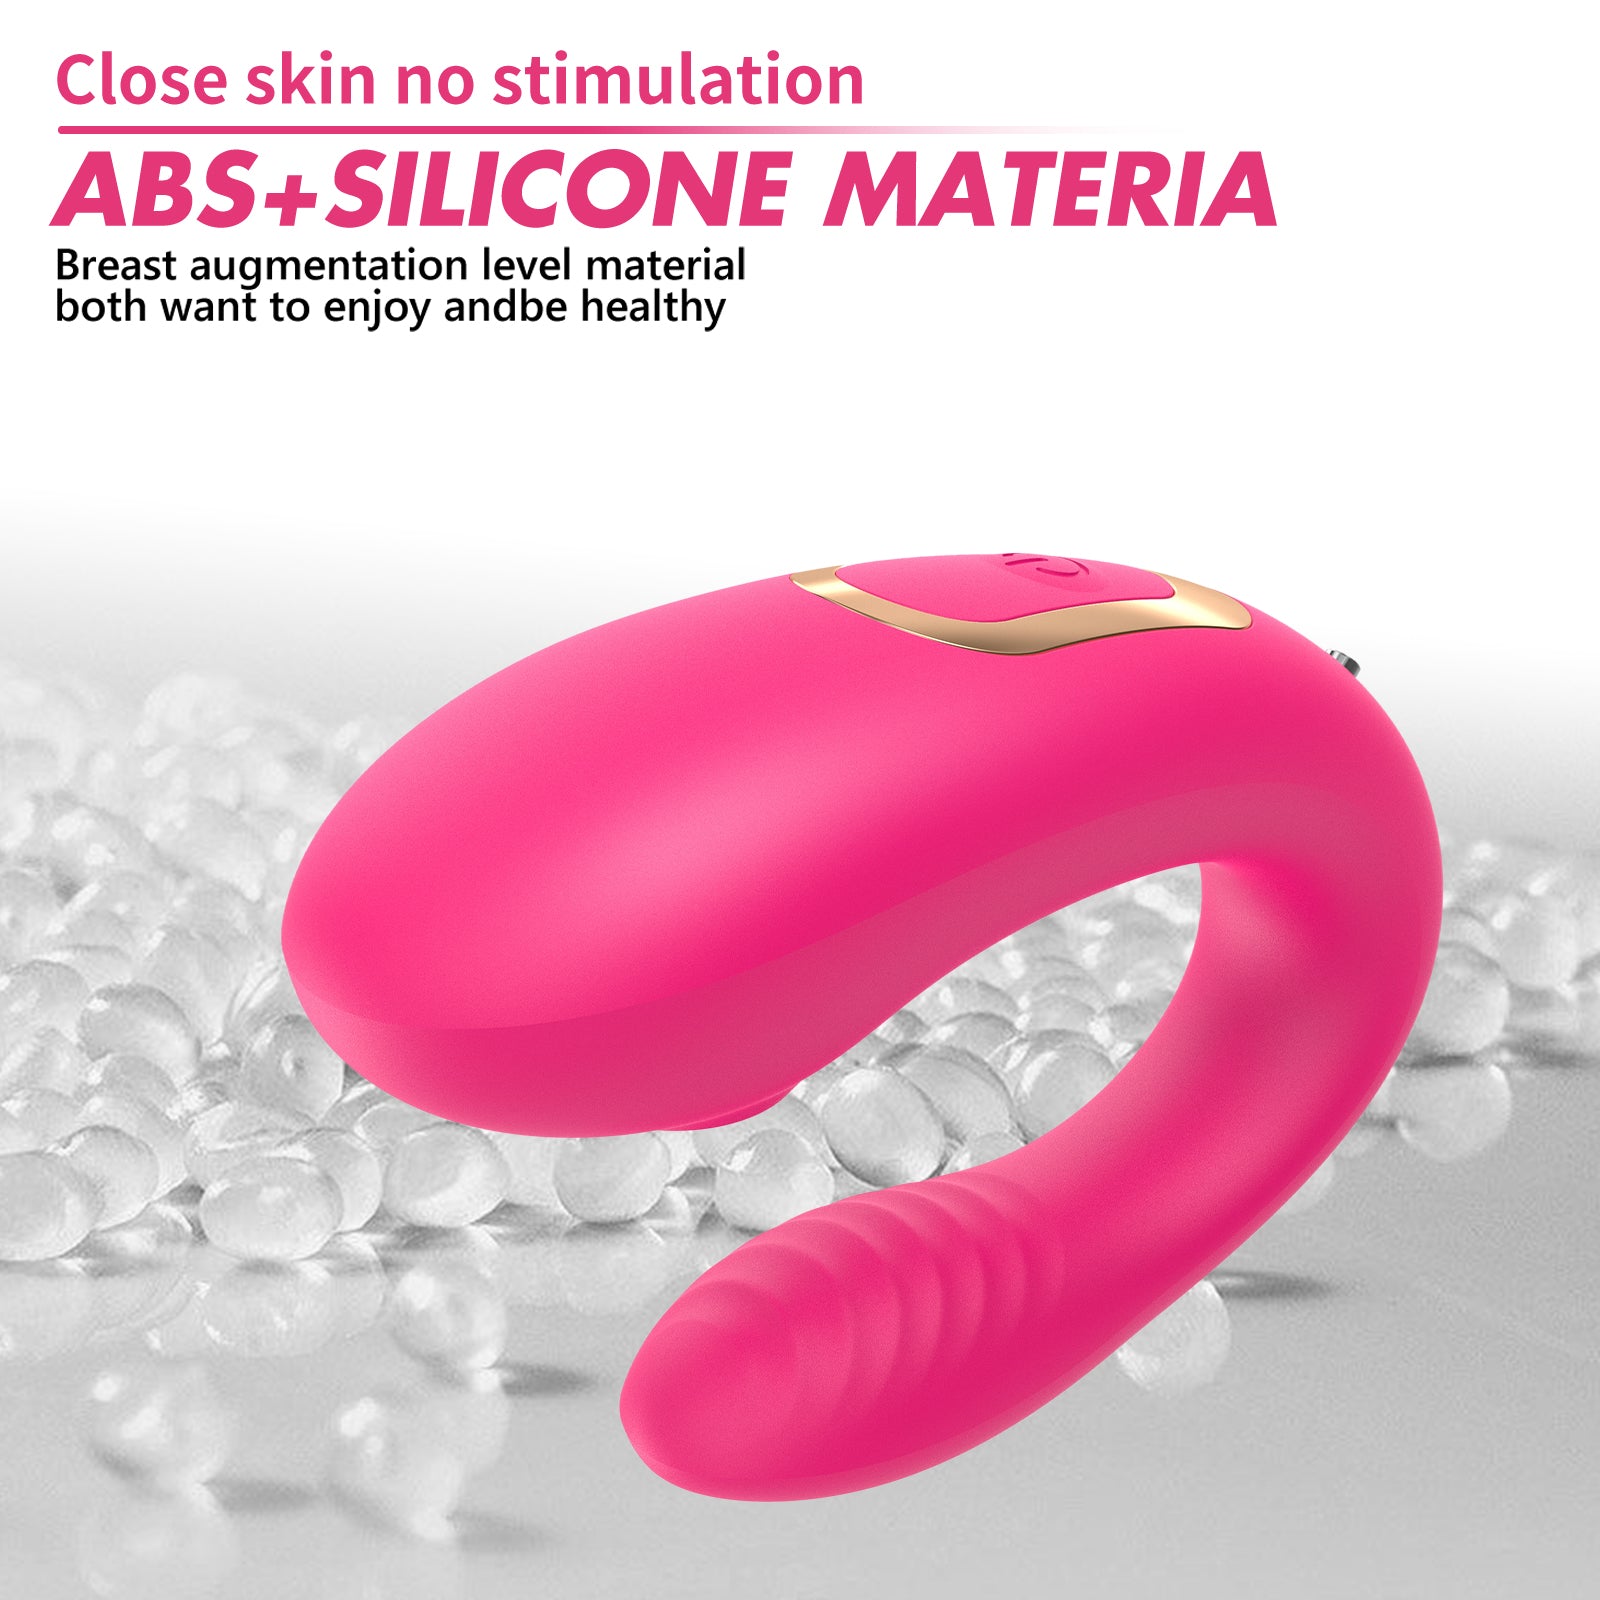 Wireless Remote Control Vibrator Safety Material